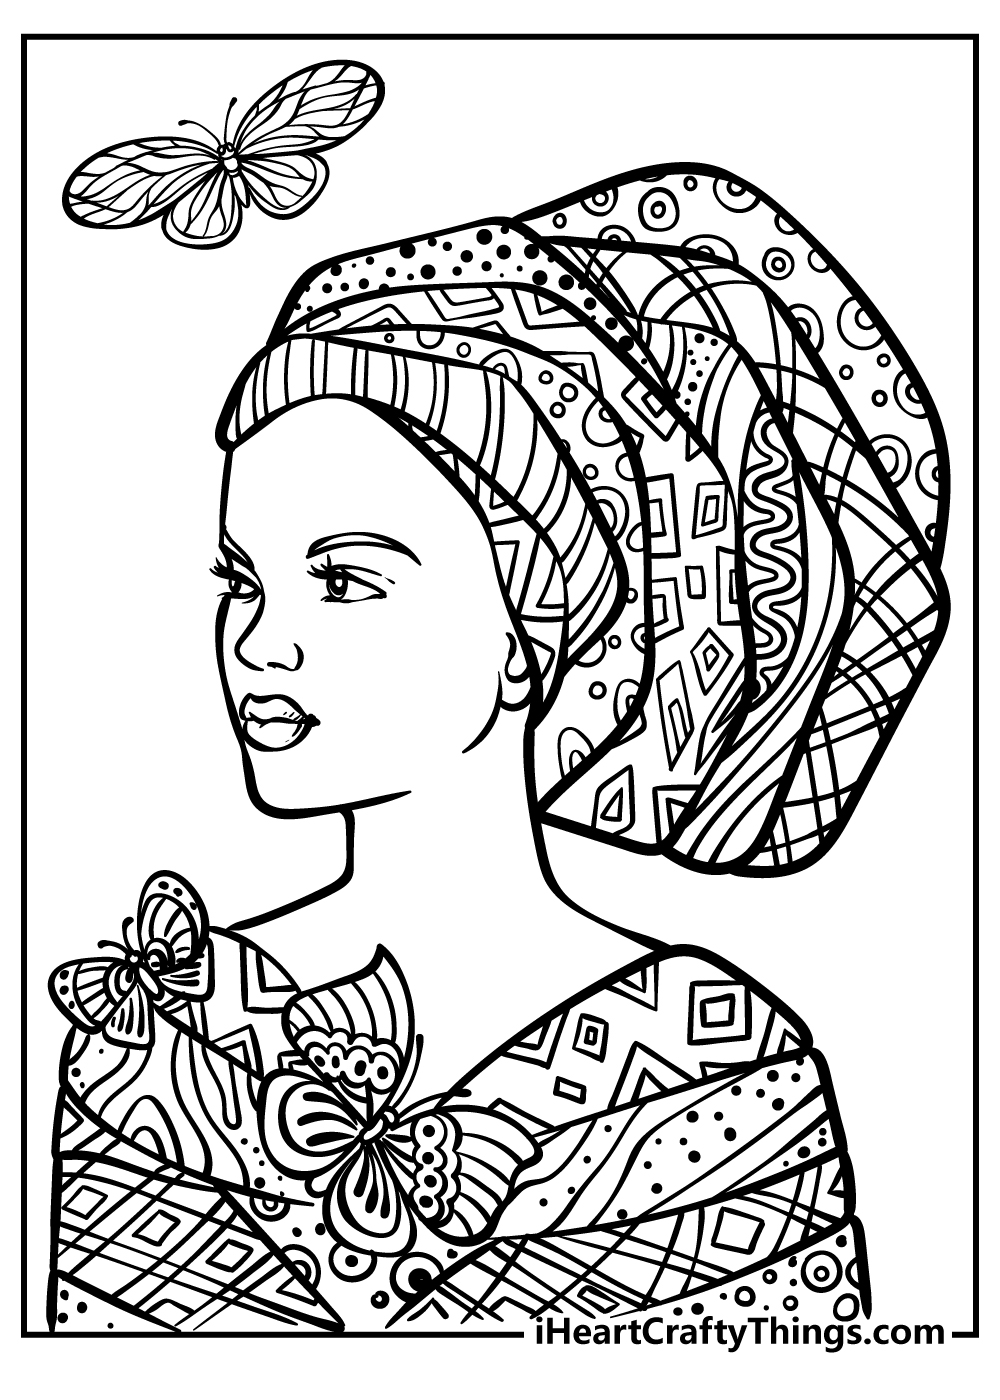 Adult coloring pages updated free printables